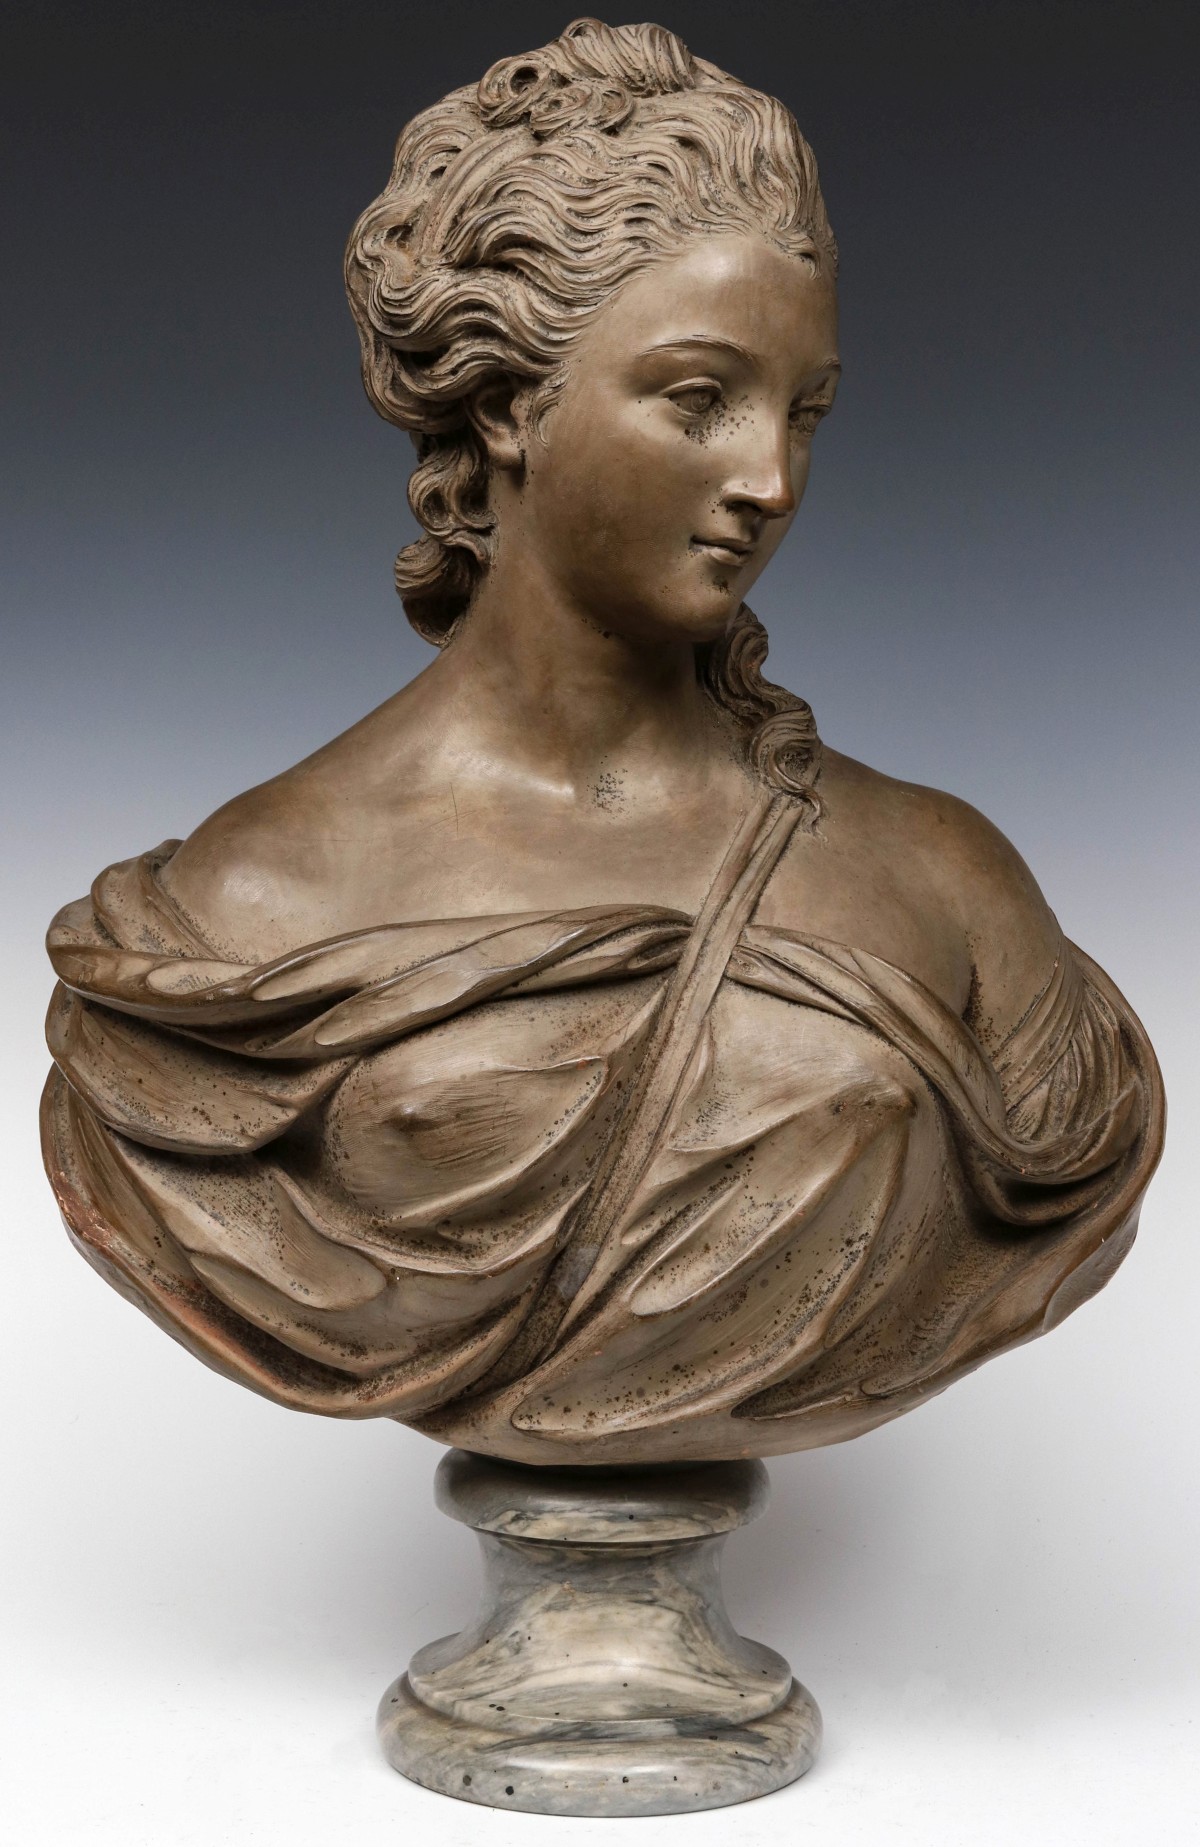 A 19C FRENCH TERRA COTTA BUST OF MARIE ANTOINETTE